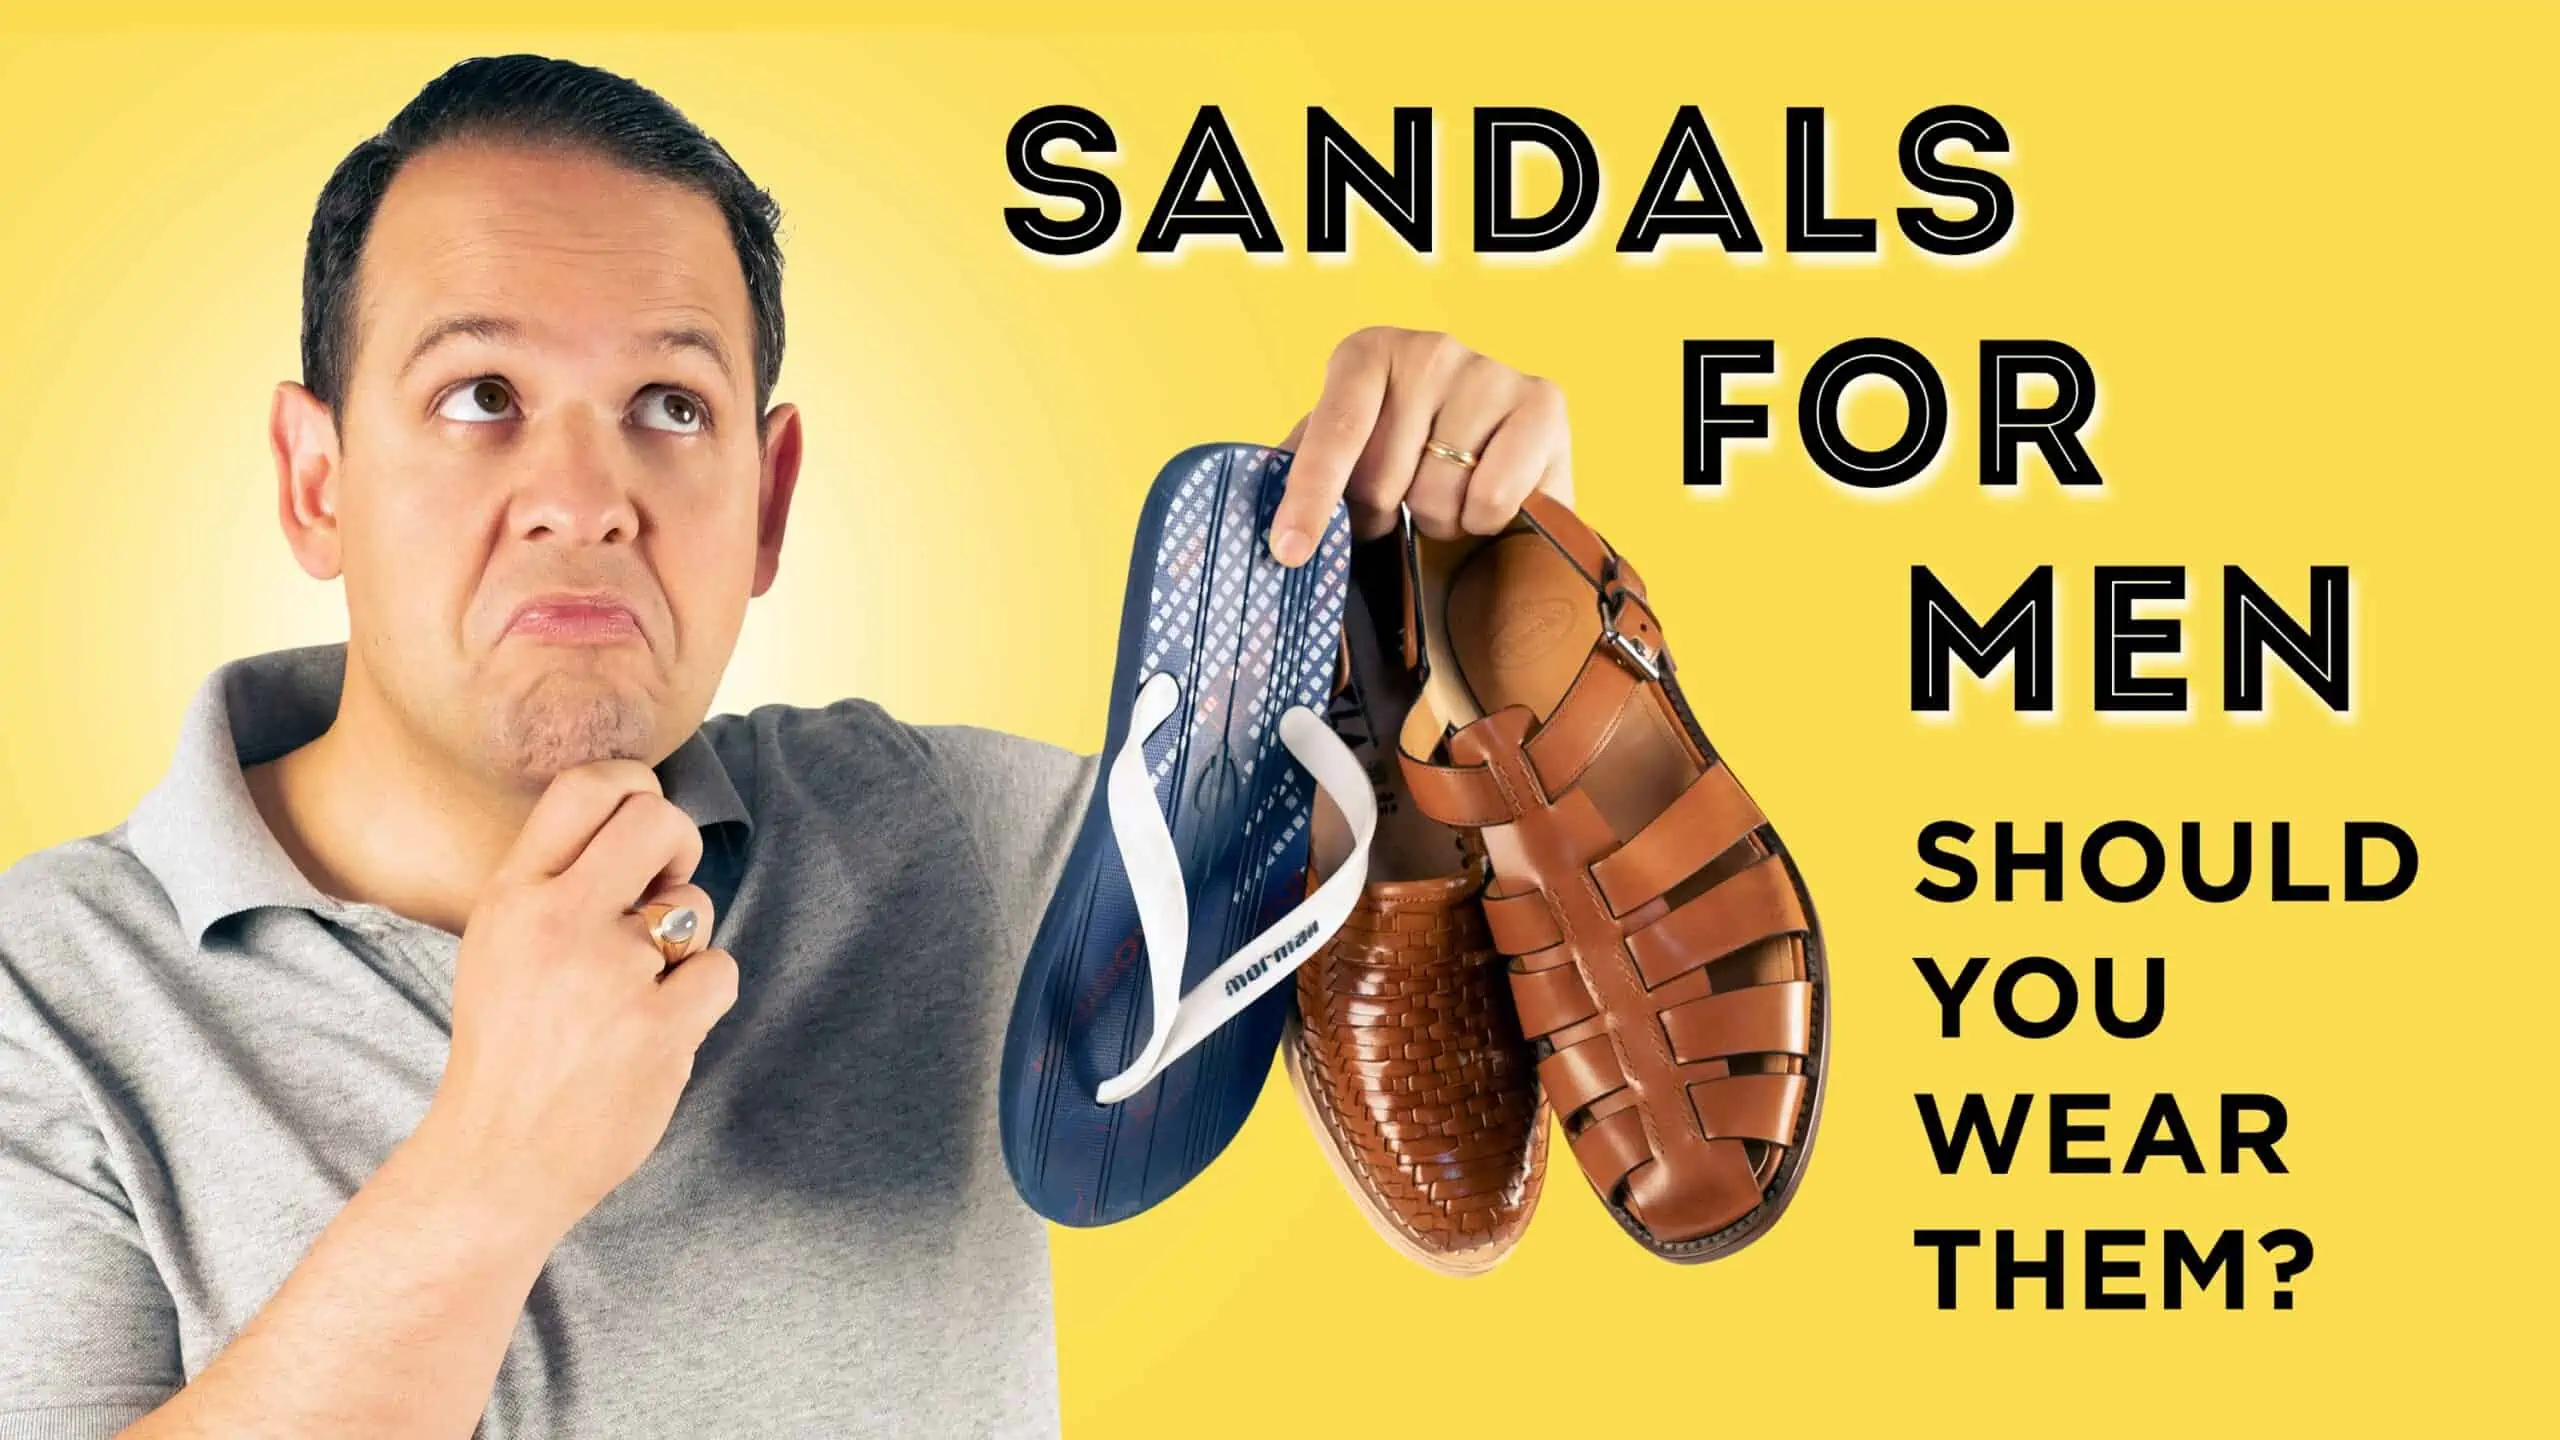 sandals for men 3840x2160 scaled